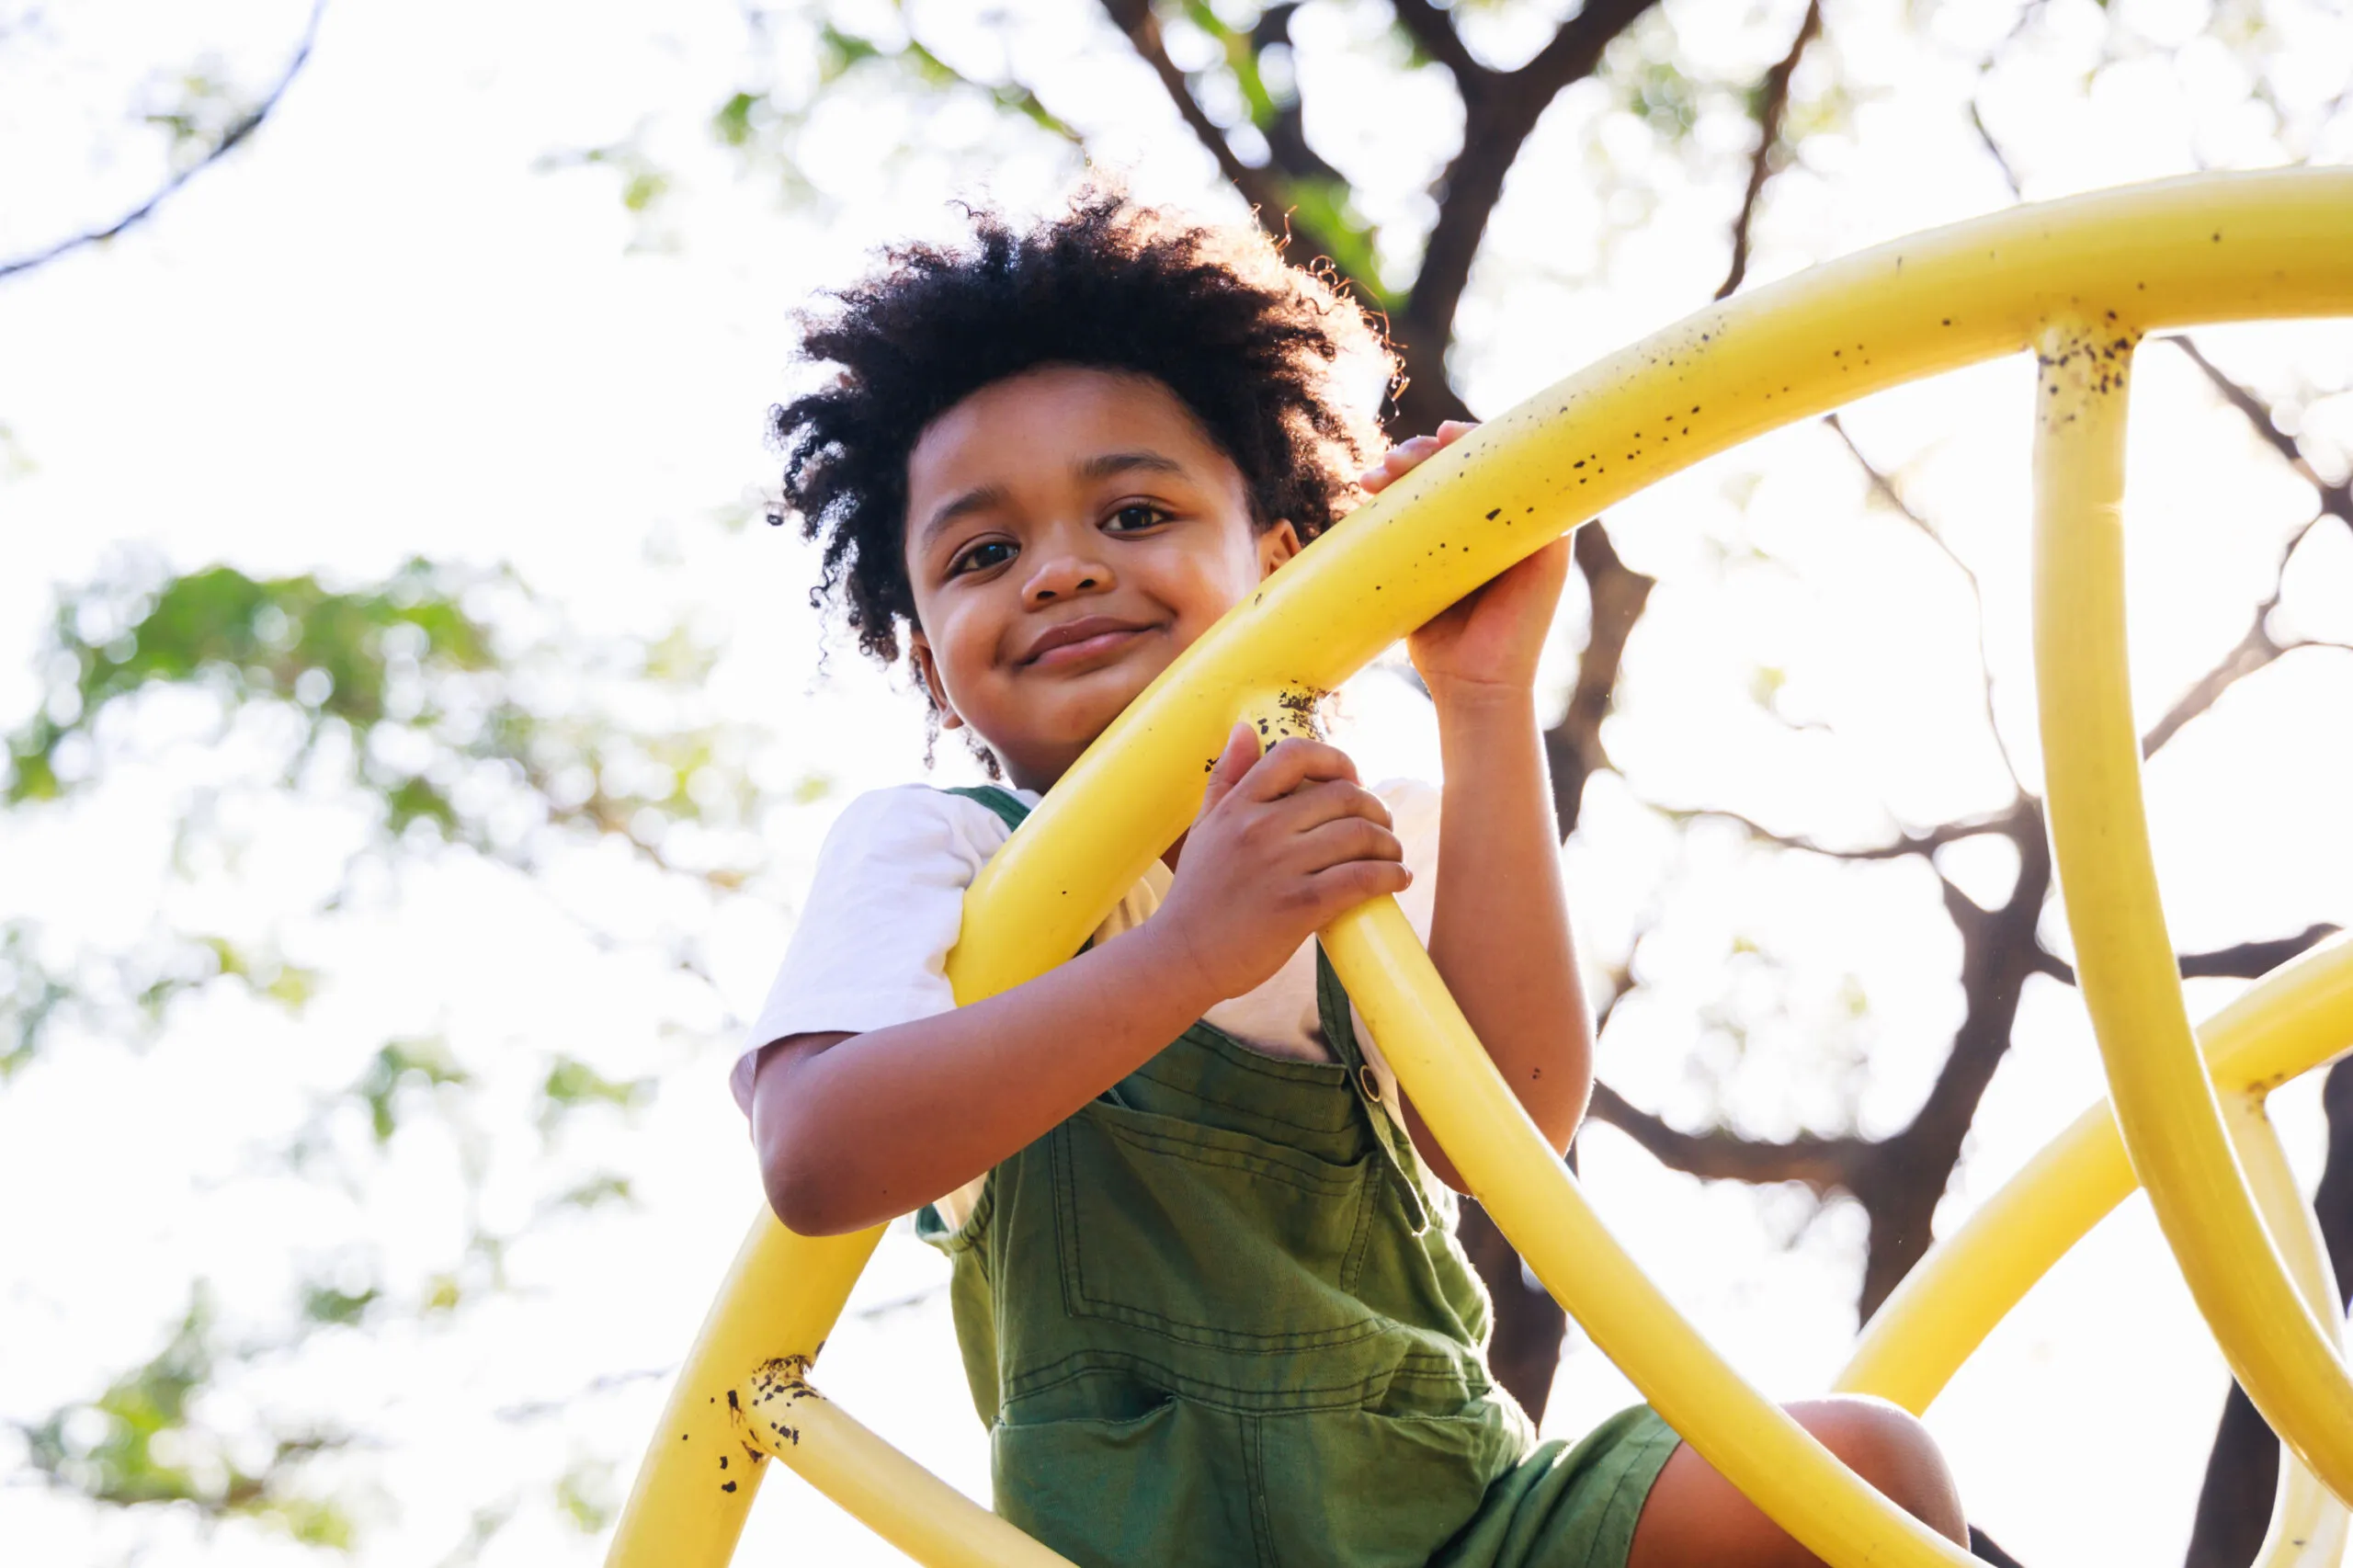 A young boy with brown hair climbing on a yellow jungle gym.